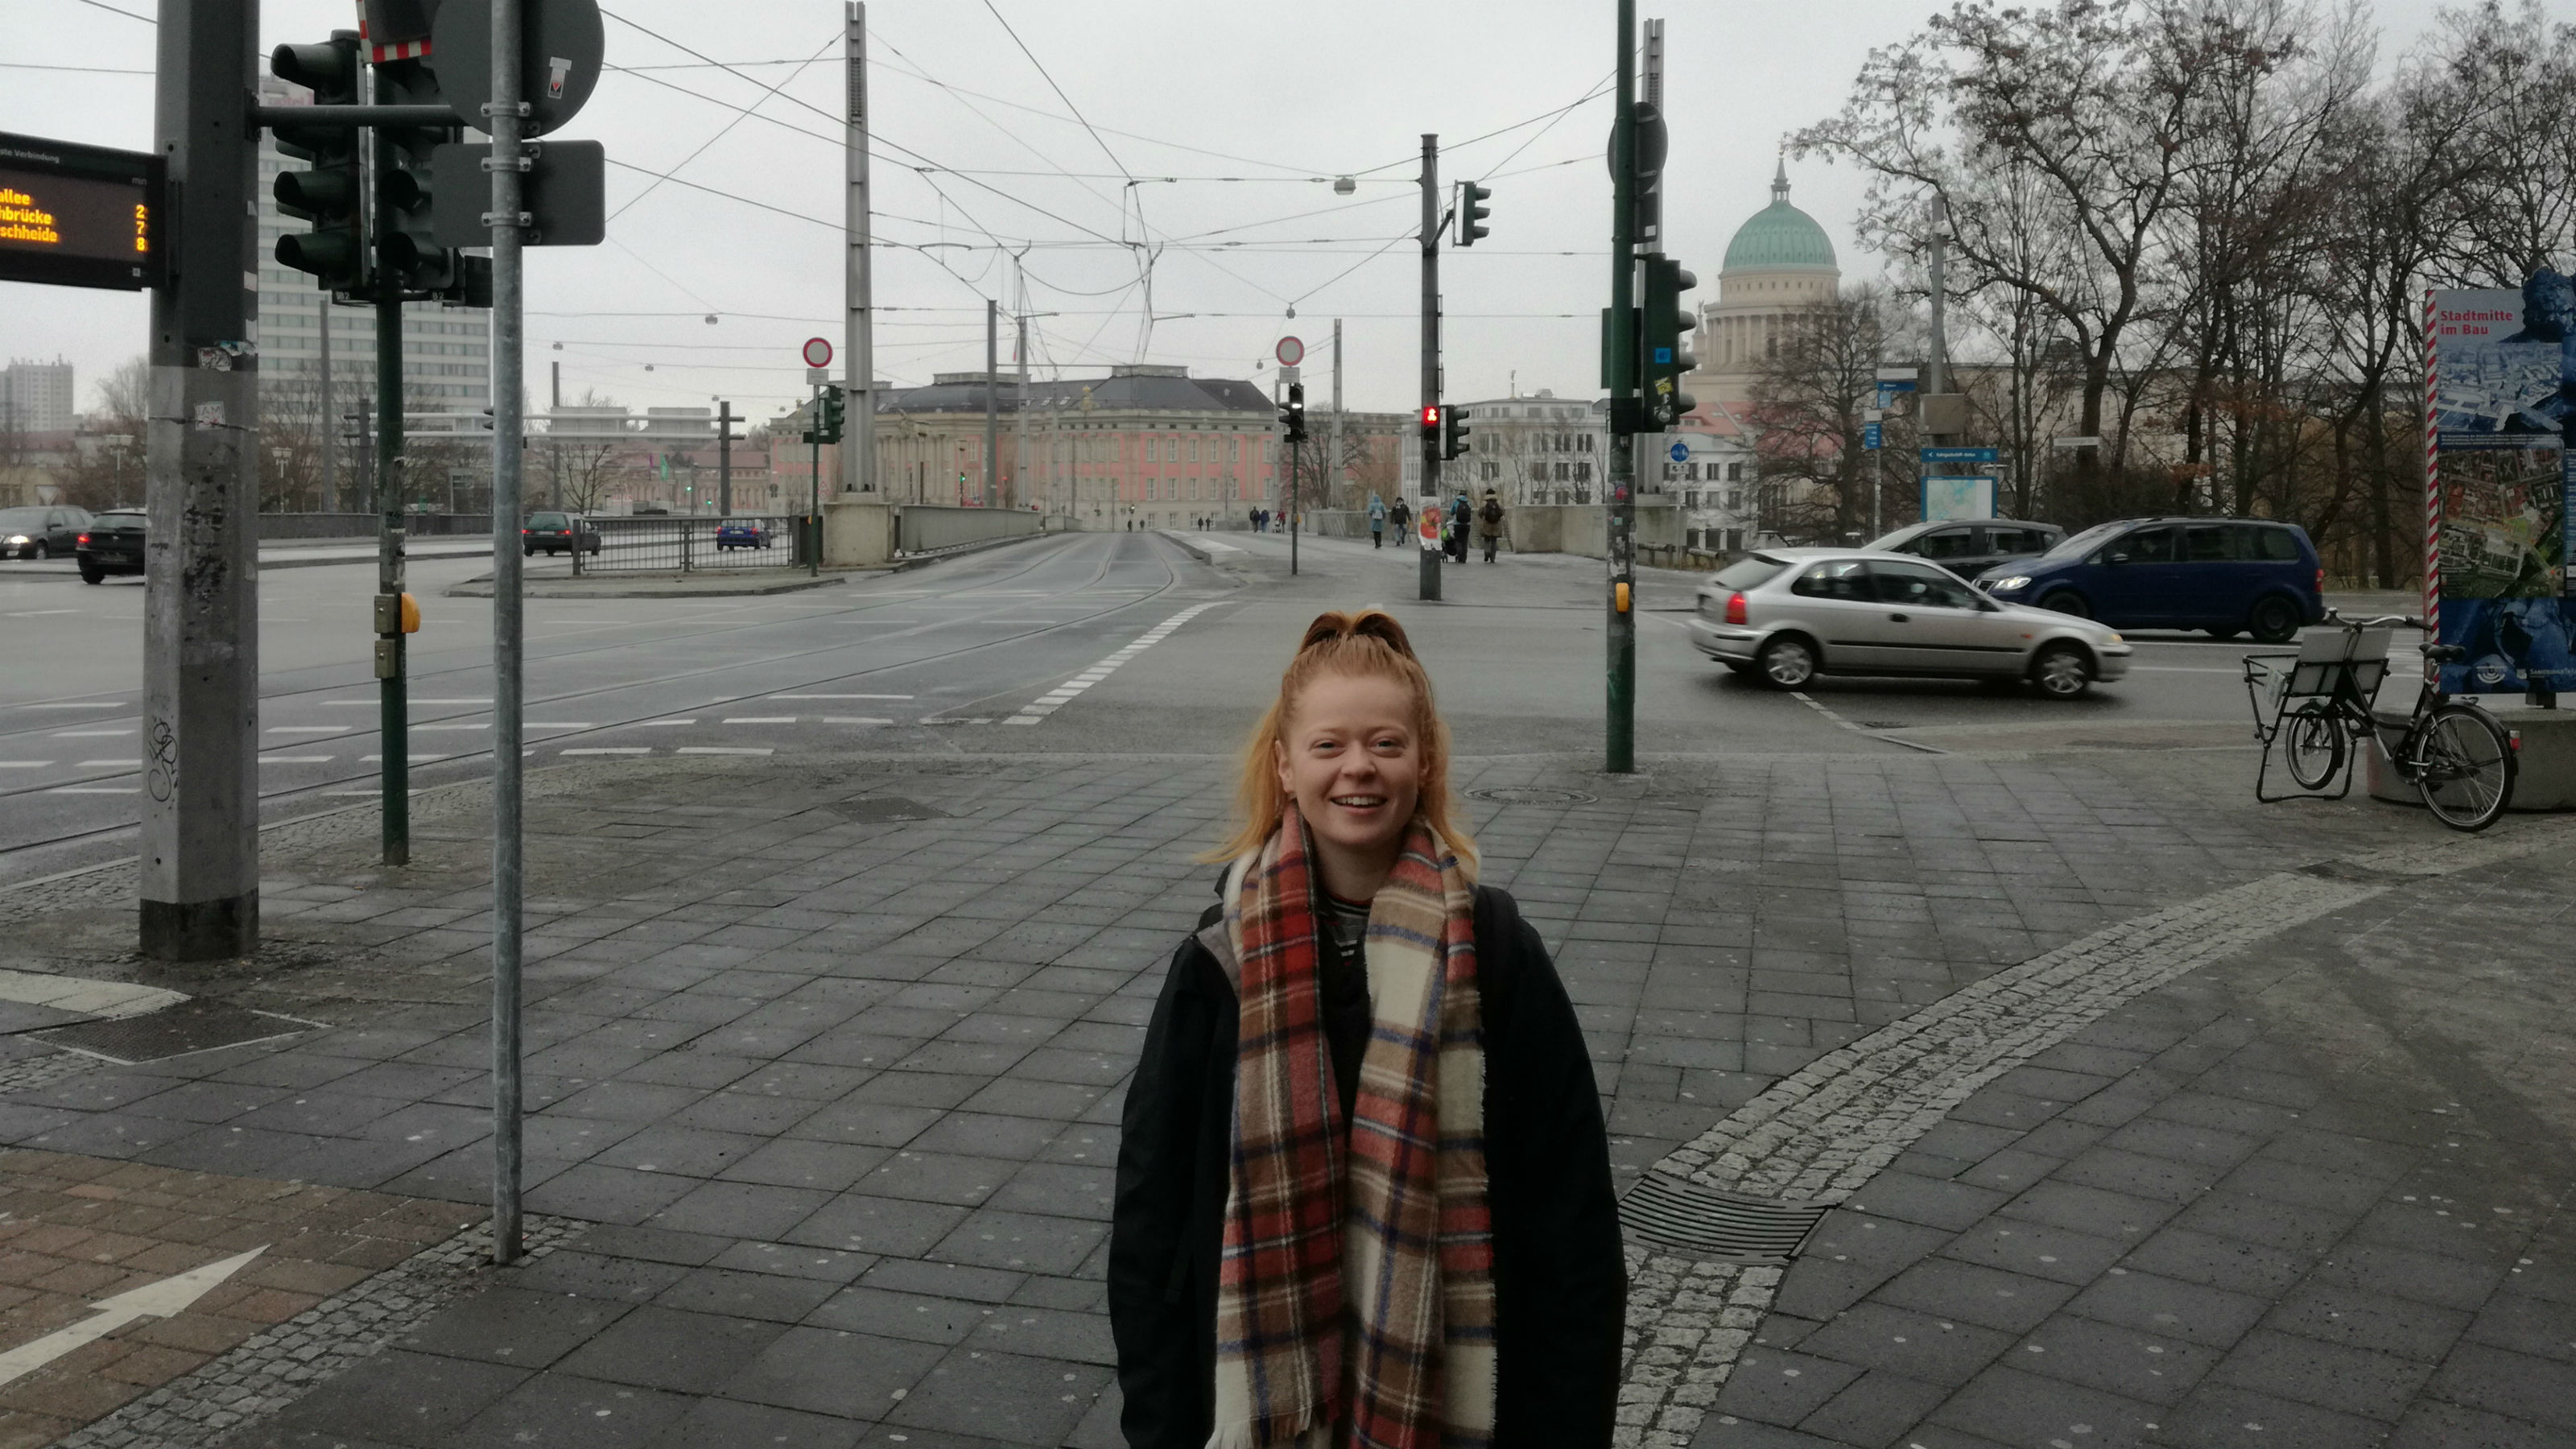 Katherine on exchange in Germany, standing at a road intersection.